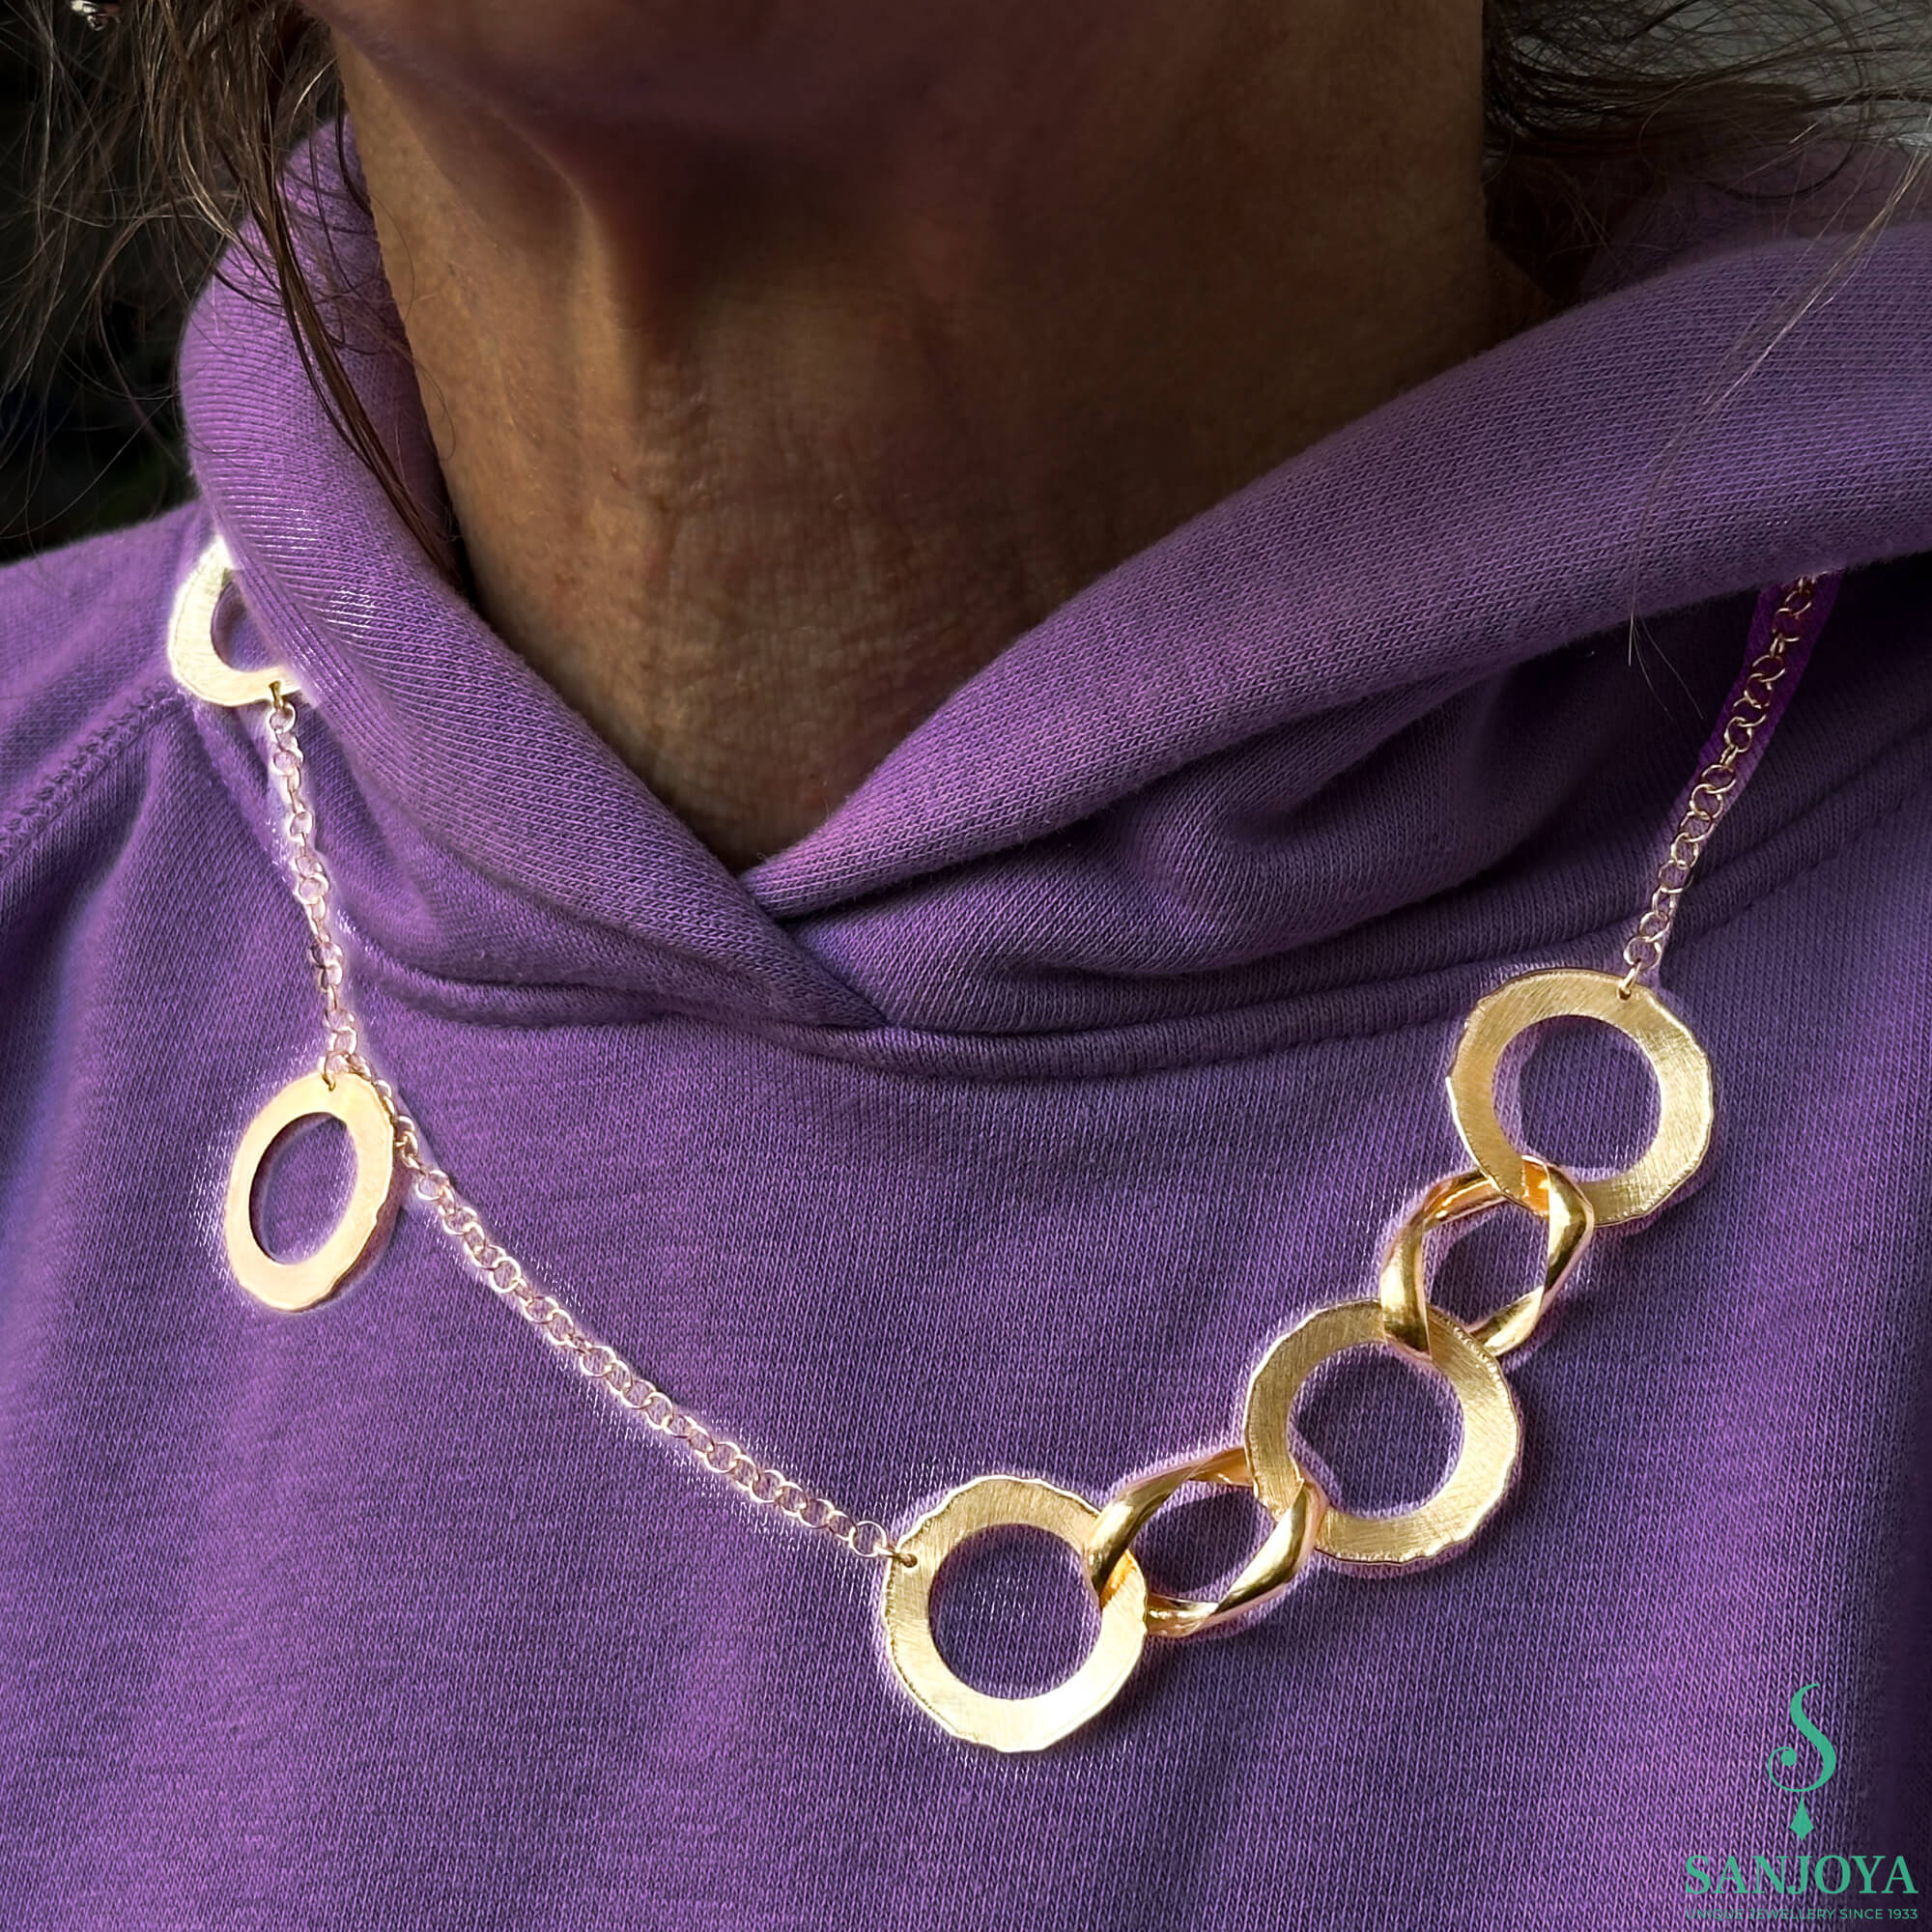 Refined and gold-plated chain with single round links